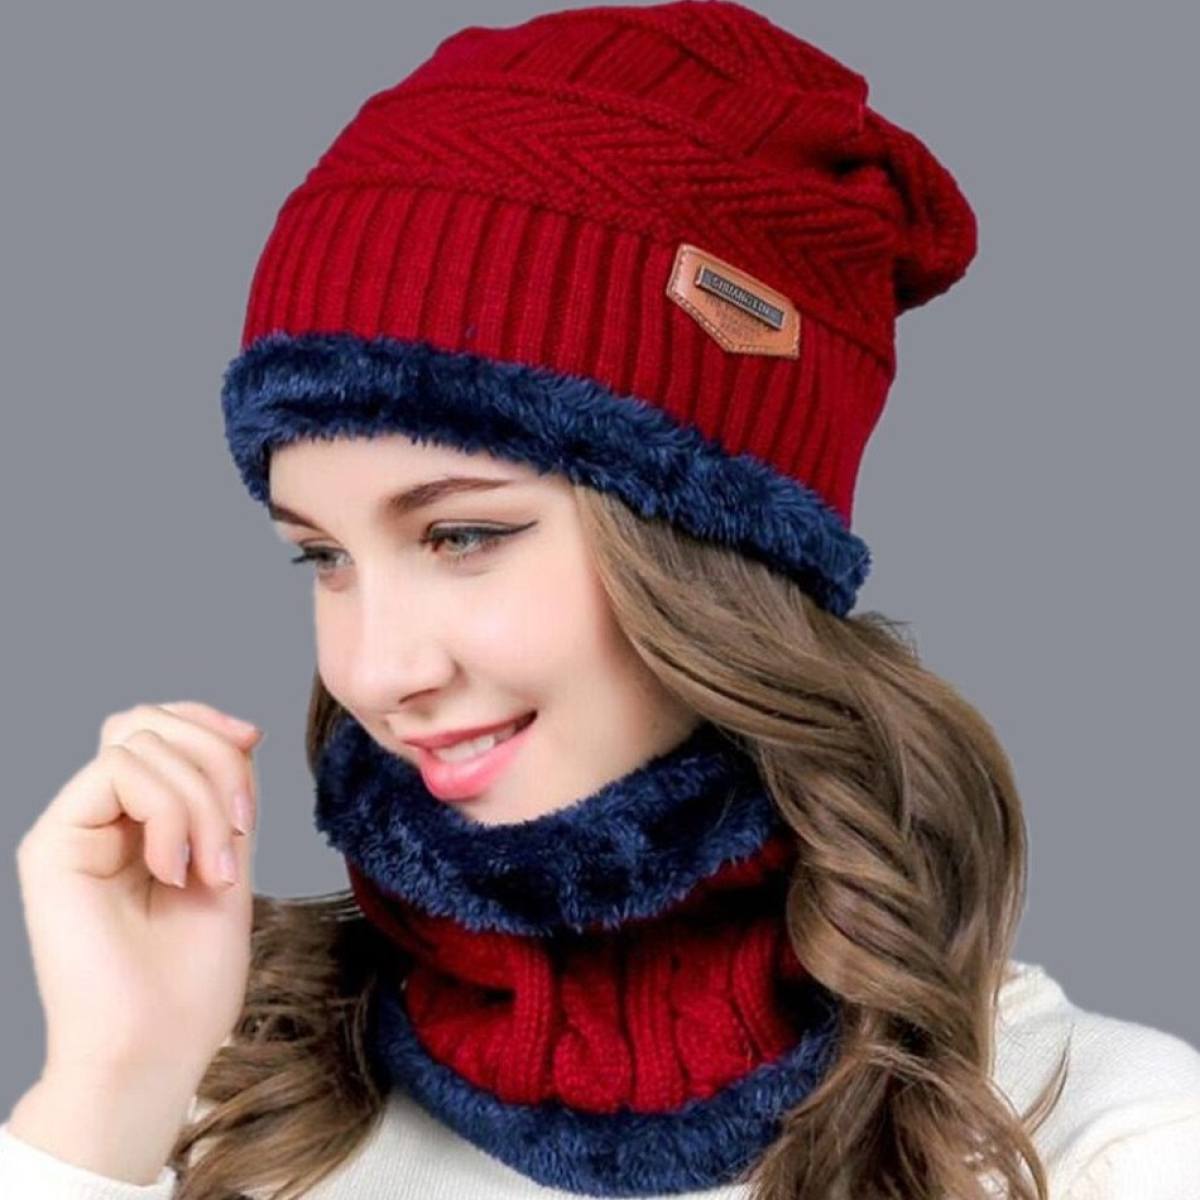 Imported Stuff UNISEX Hot Knitted Cap Neck Warmer Winter Hat, Hot Cap and Neck Warmer